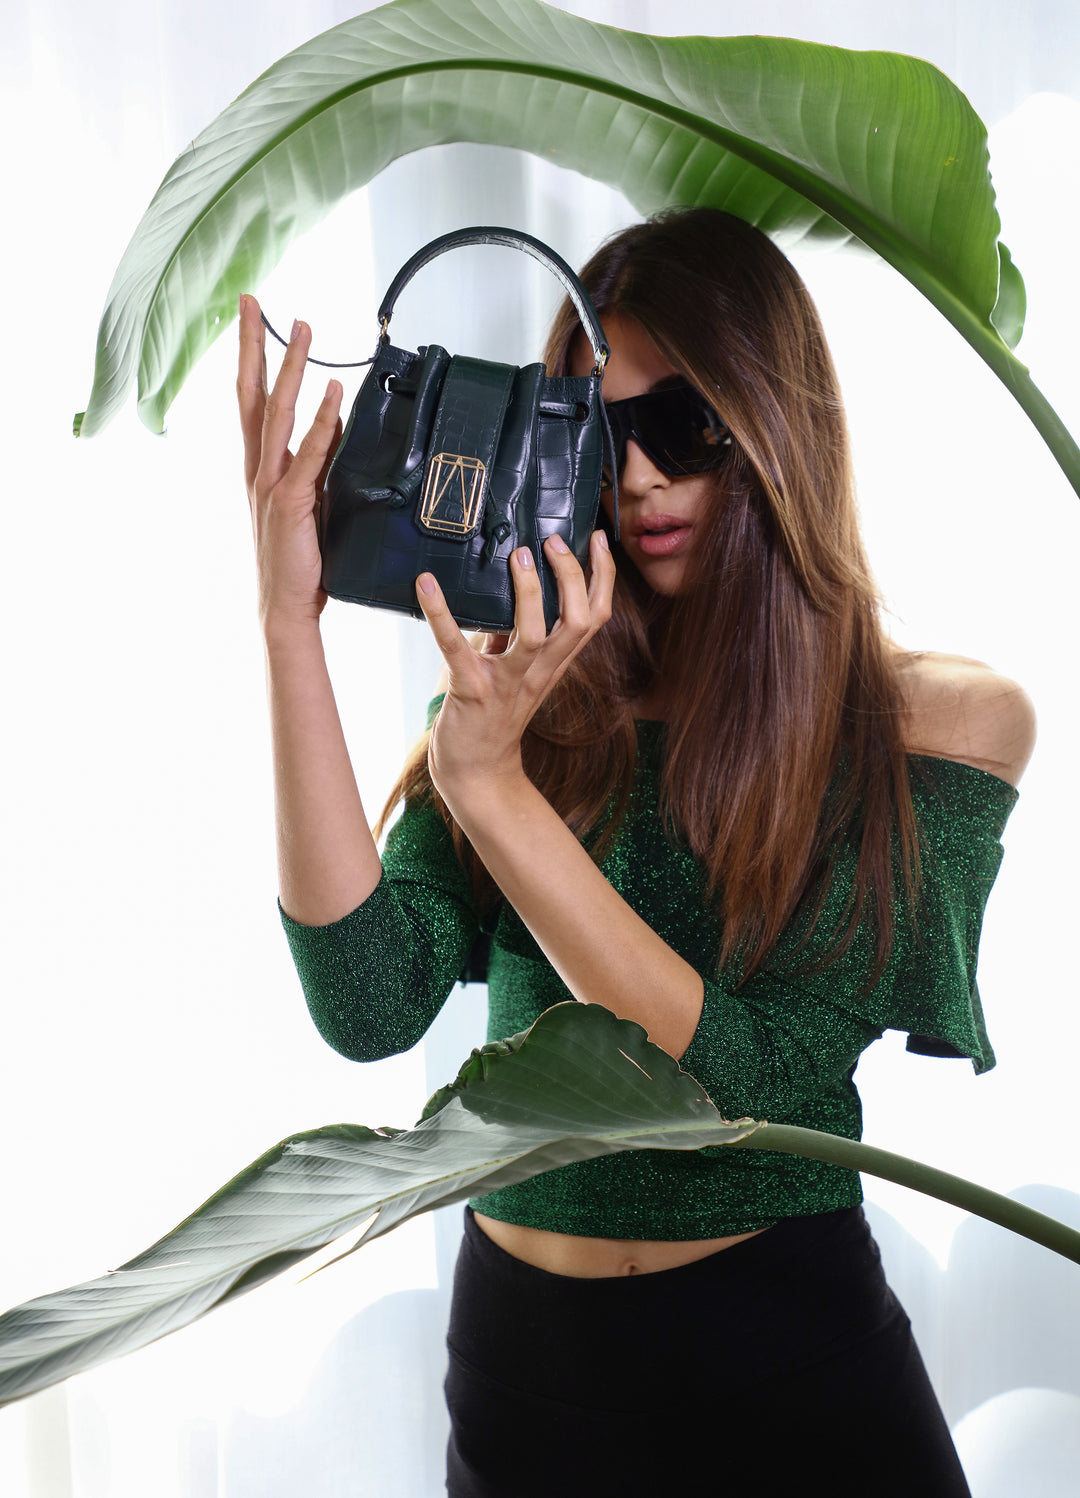 Woman in green outfit and sunglasses holding stylish handbag among large leaves